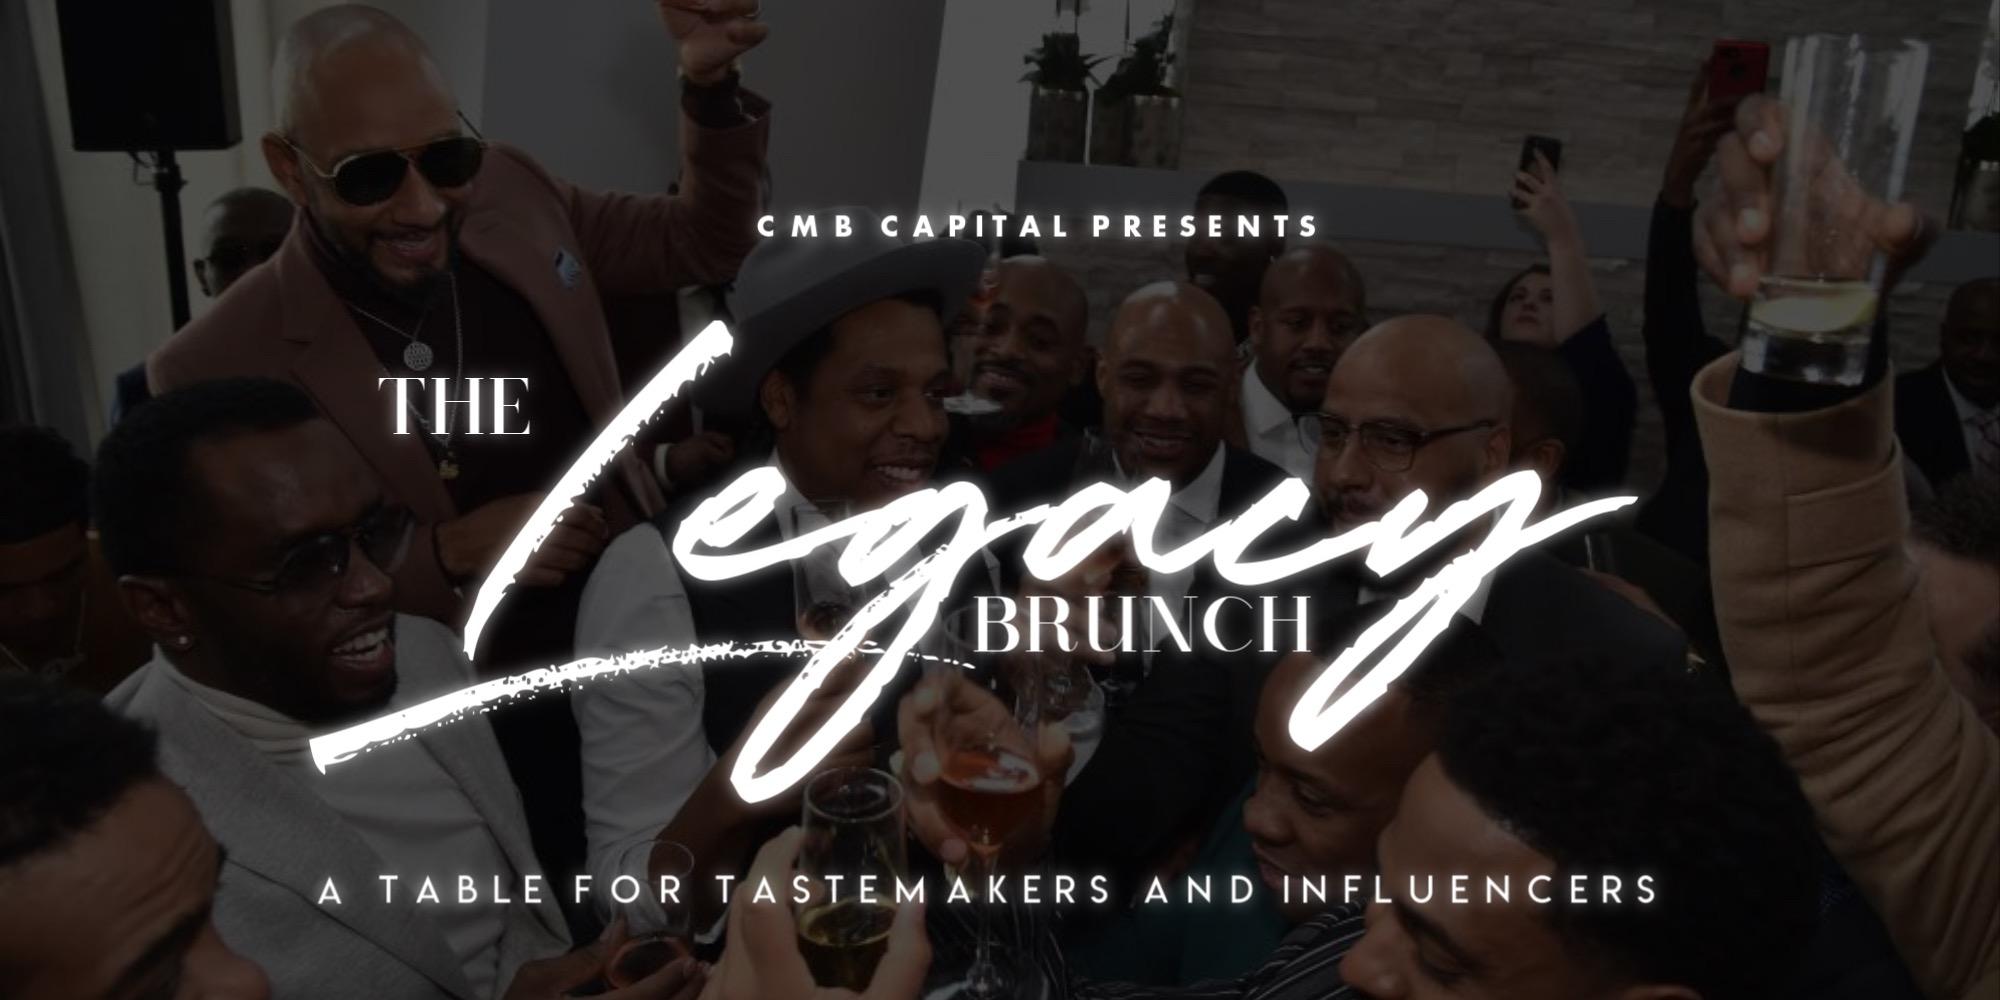 The Legacy Brunch